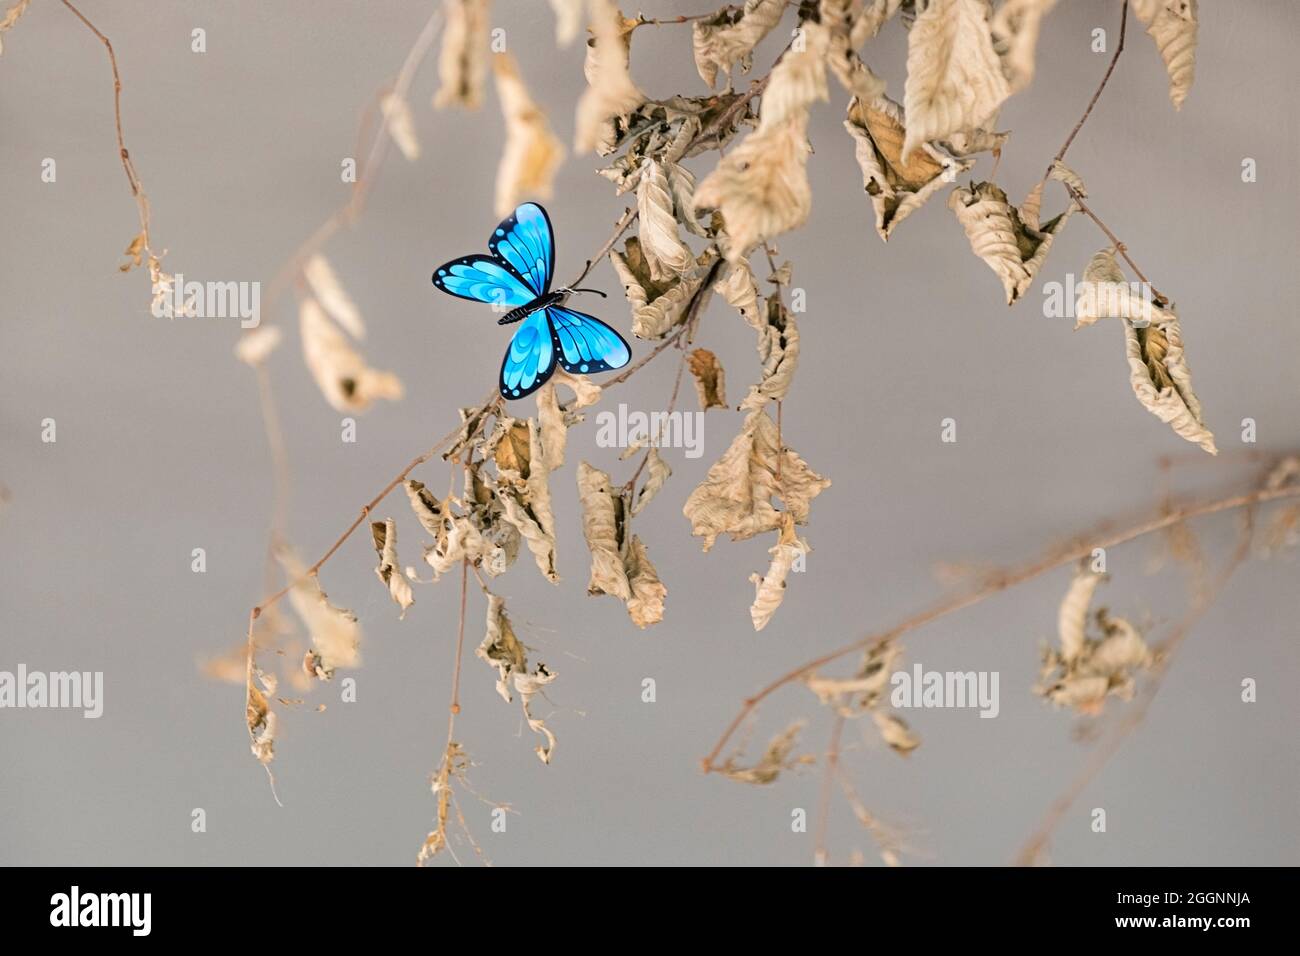 The unusual wall decoration of dried Beech Tree Fagus sylvatica leaves on small branches with a colourful blue paper butterfly. Stock Photo